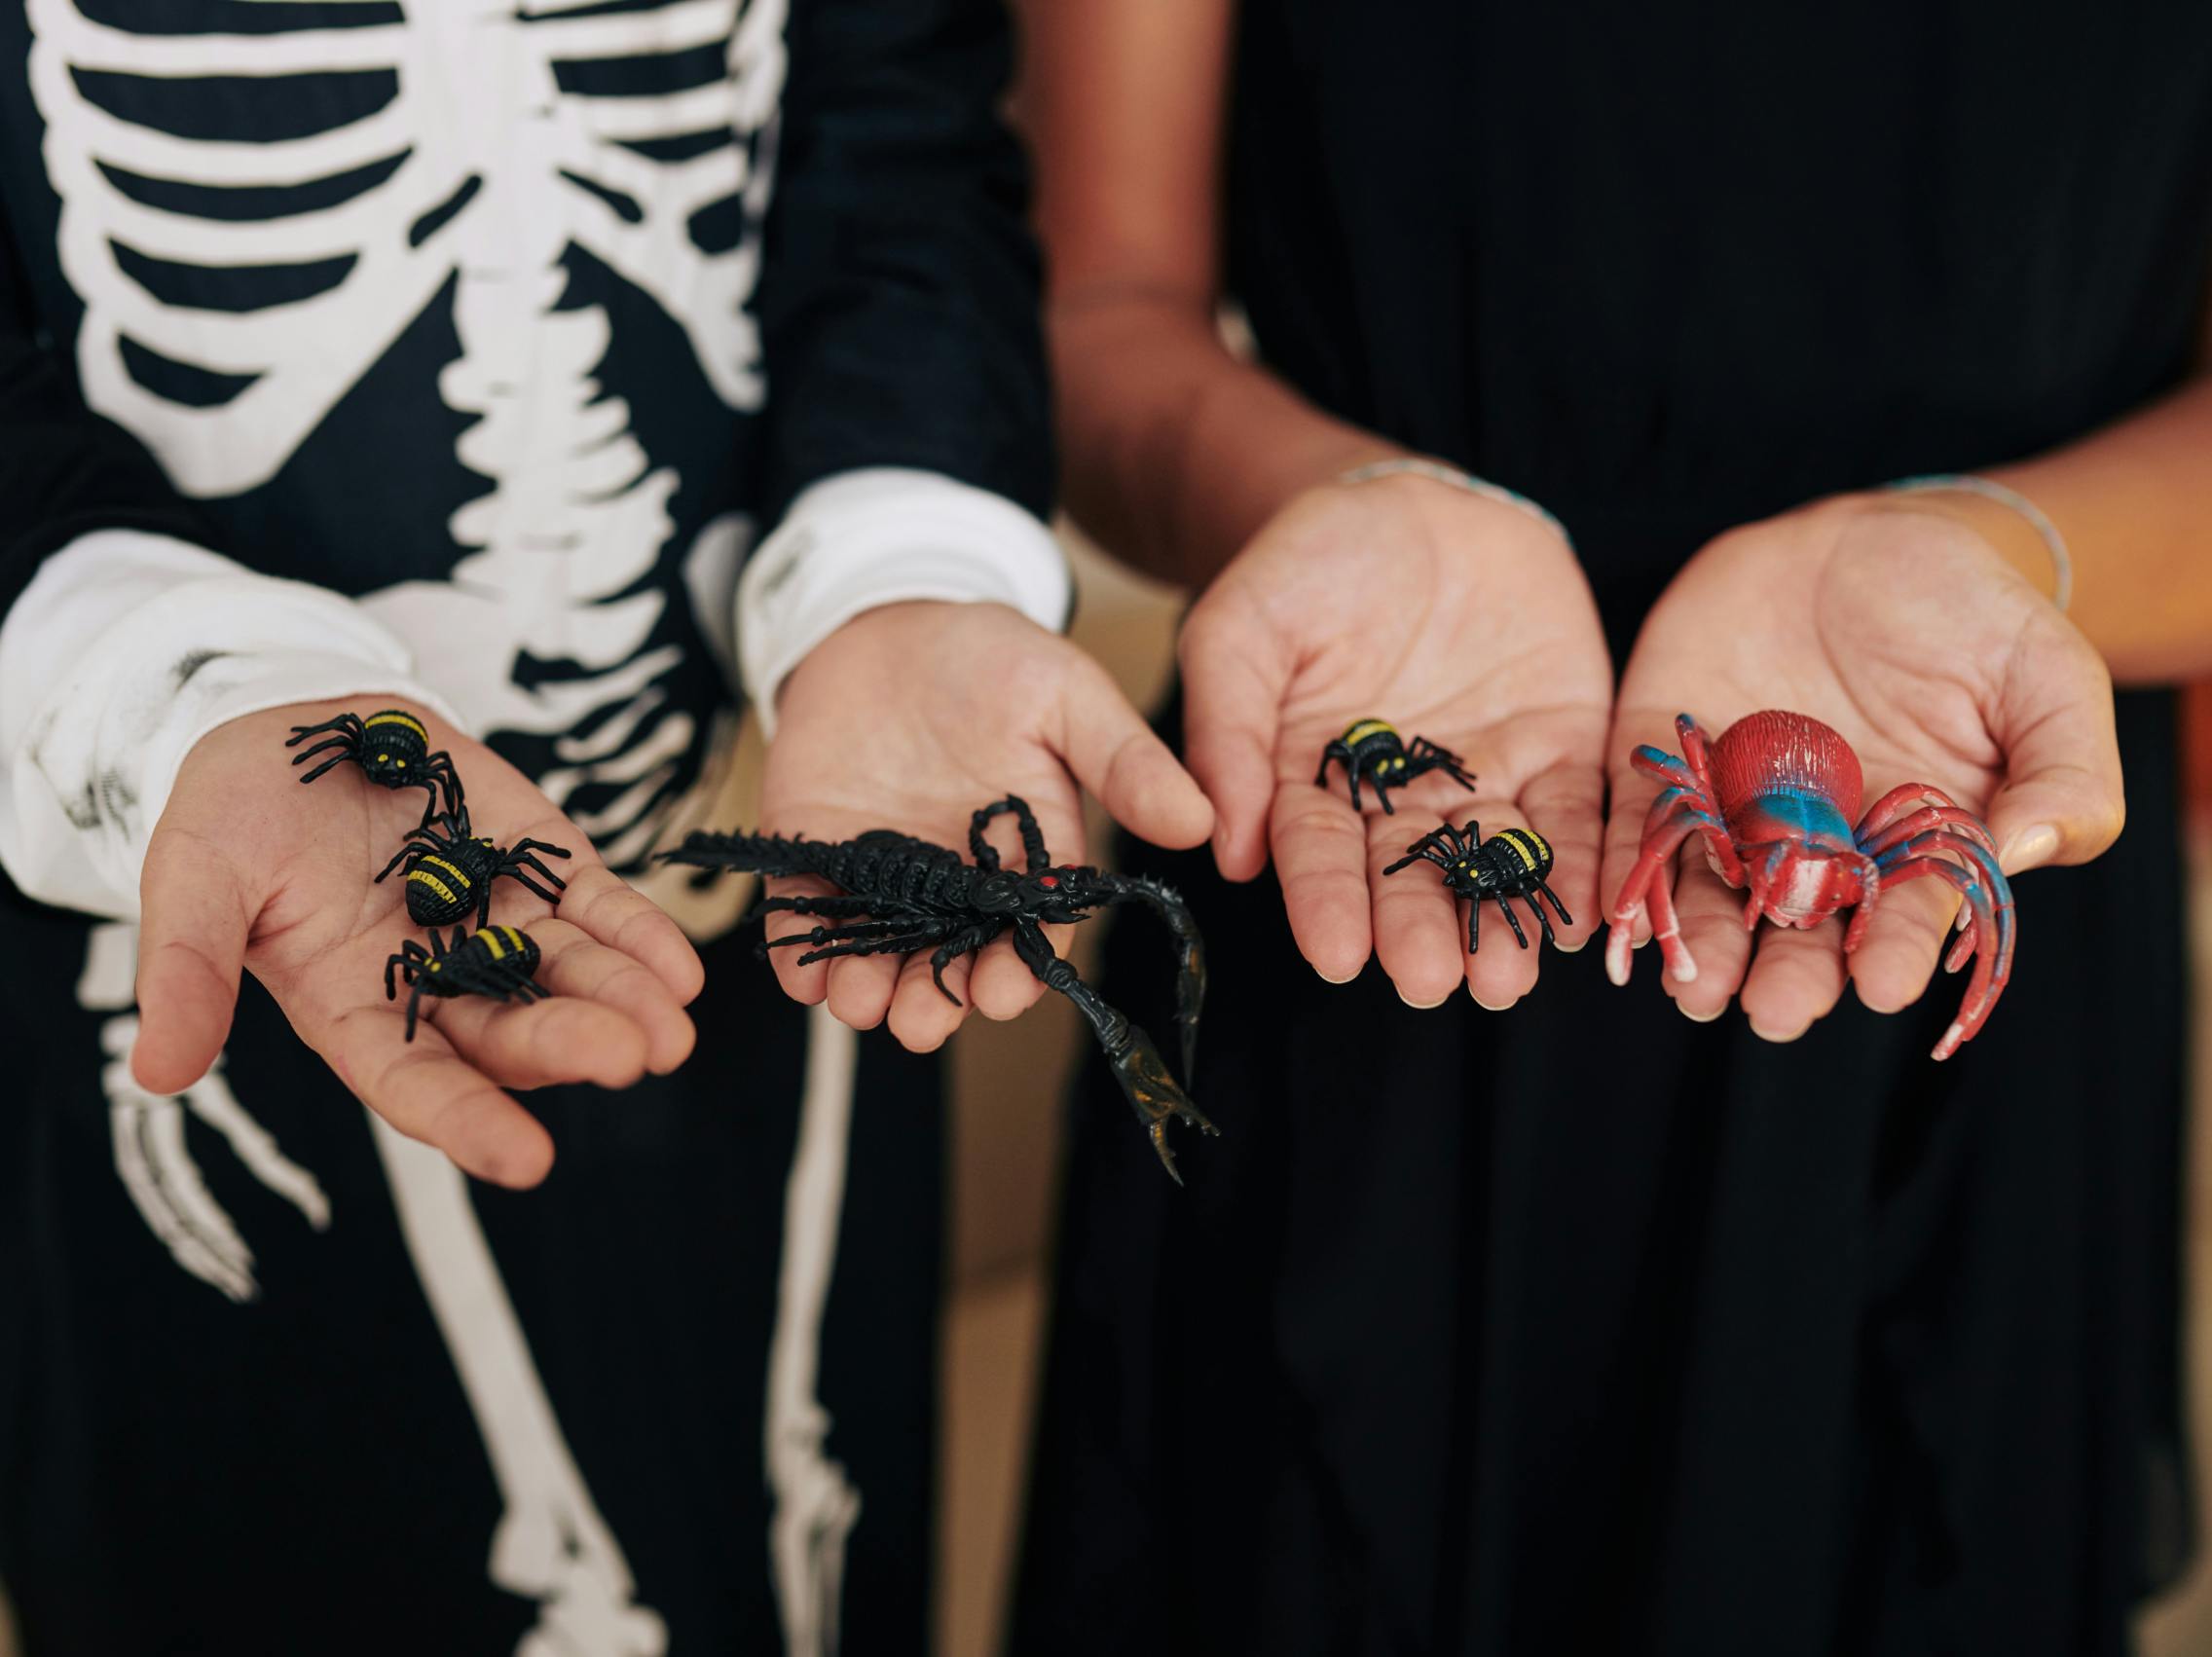 Two people holding out some fake plastic bugs in their hands while wearing costumes.